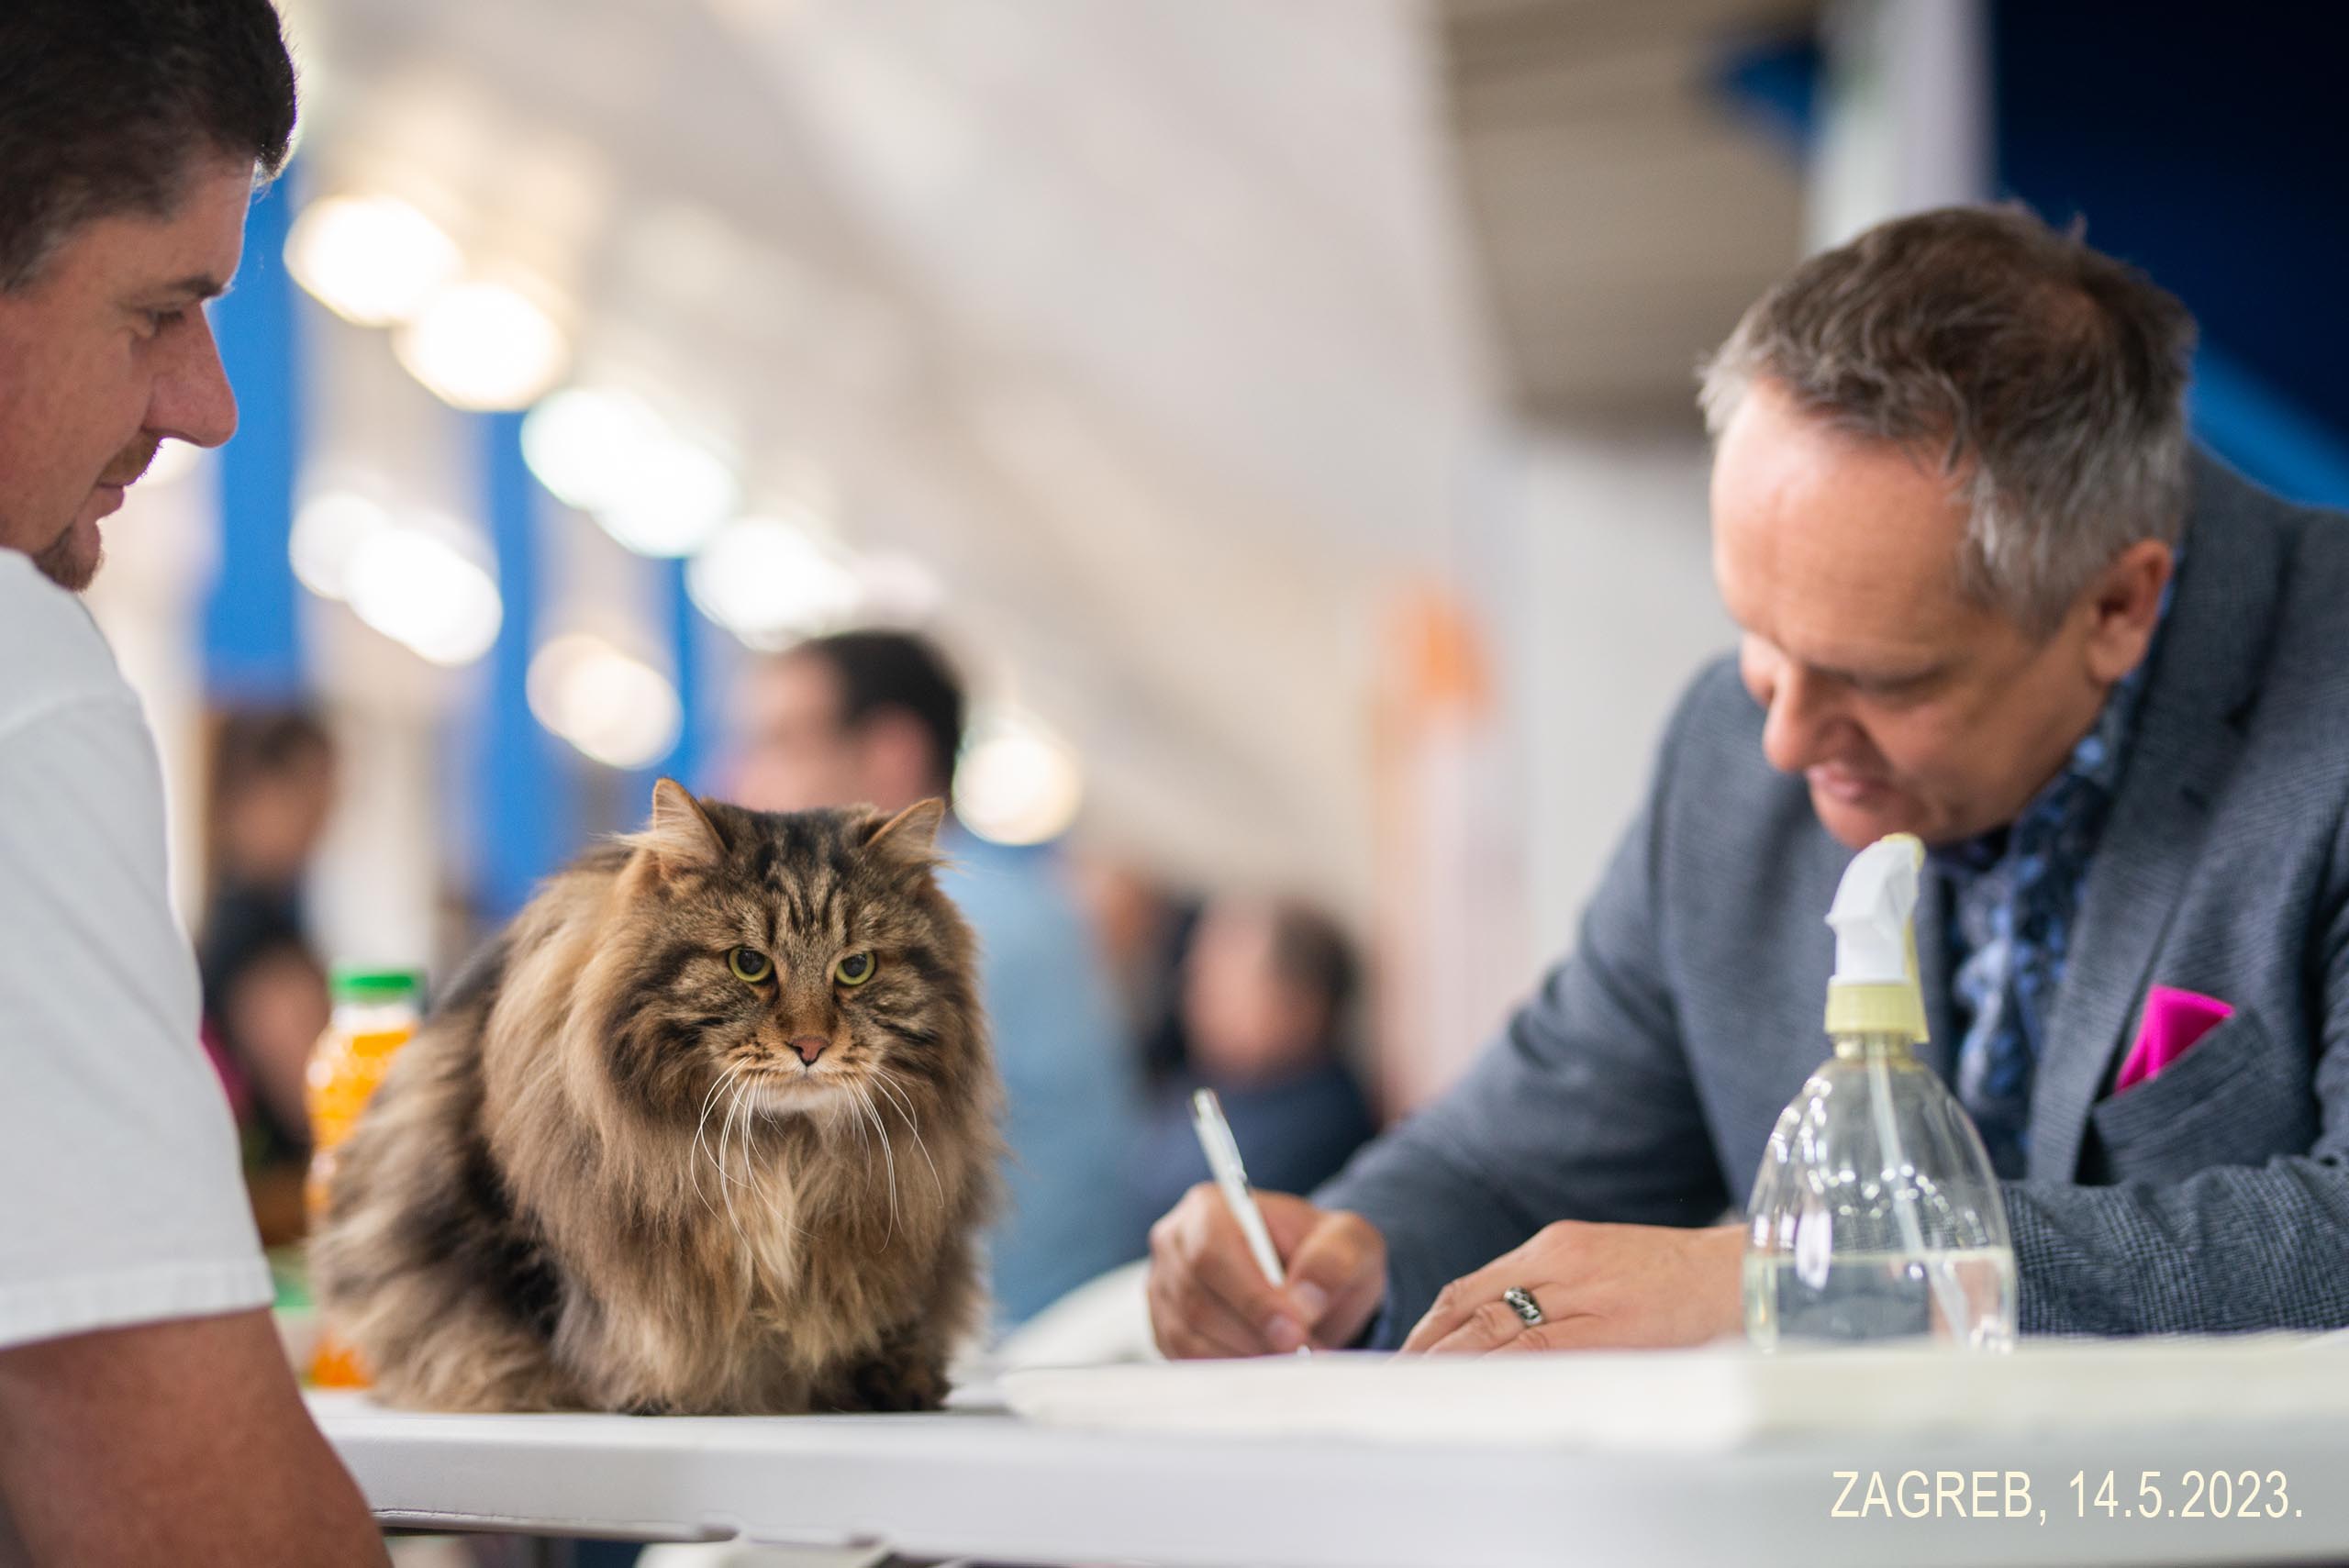 World's most beautiful cats will be in Karlovac